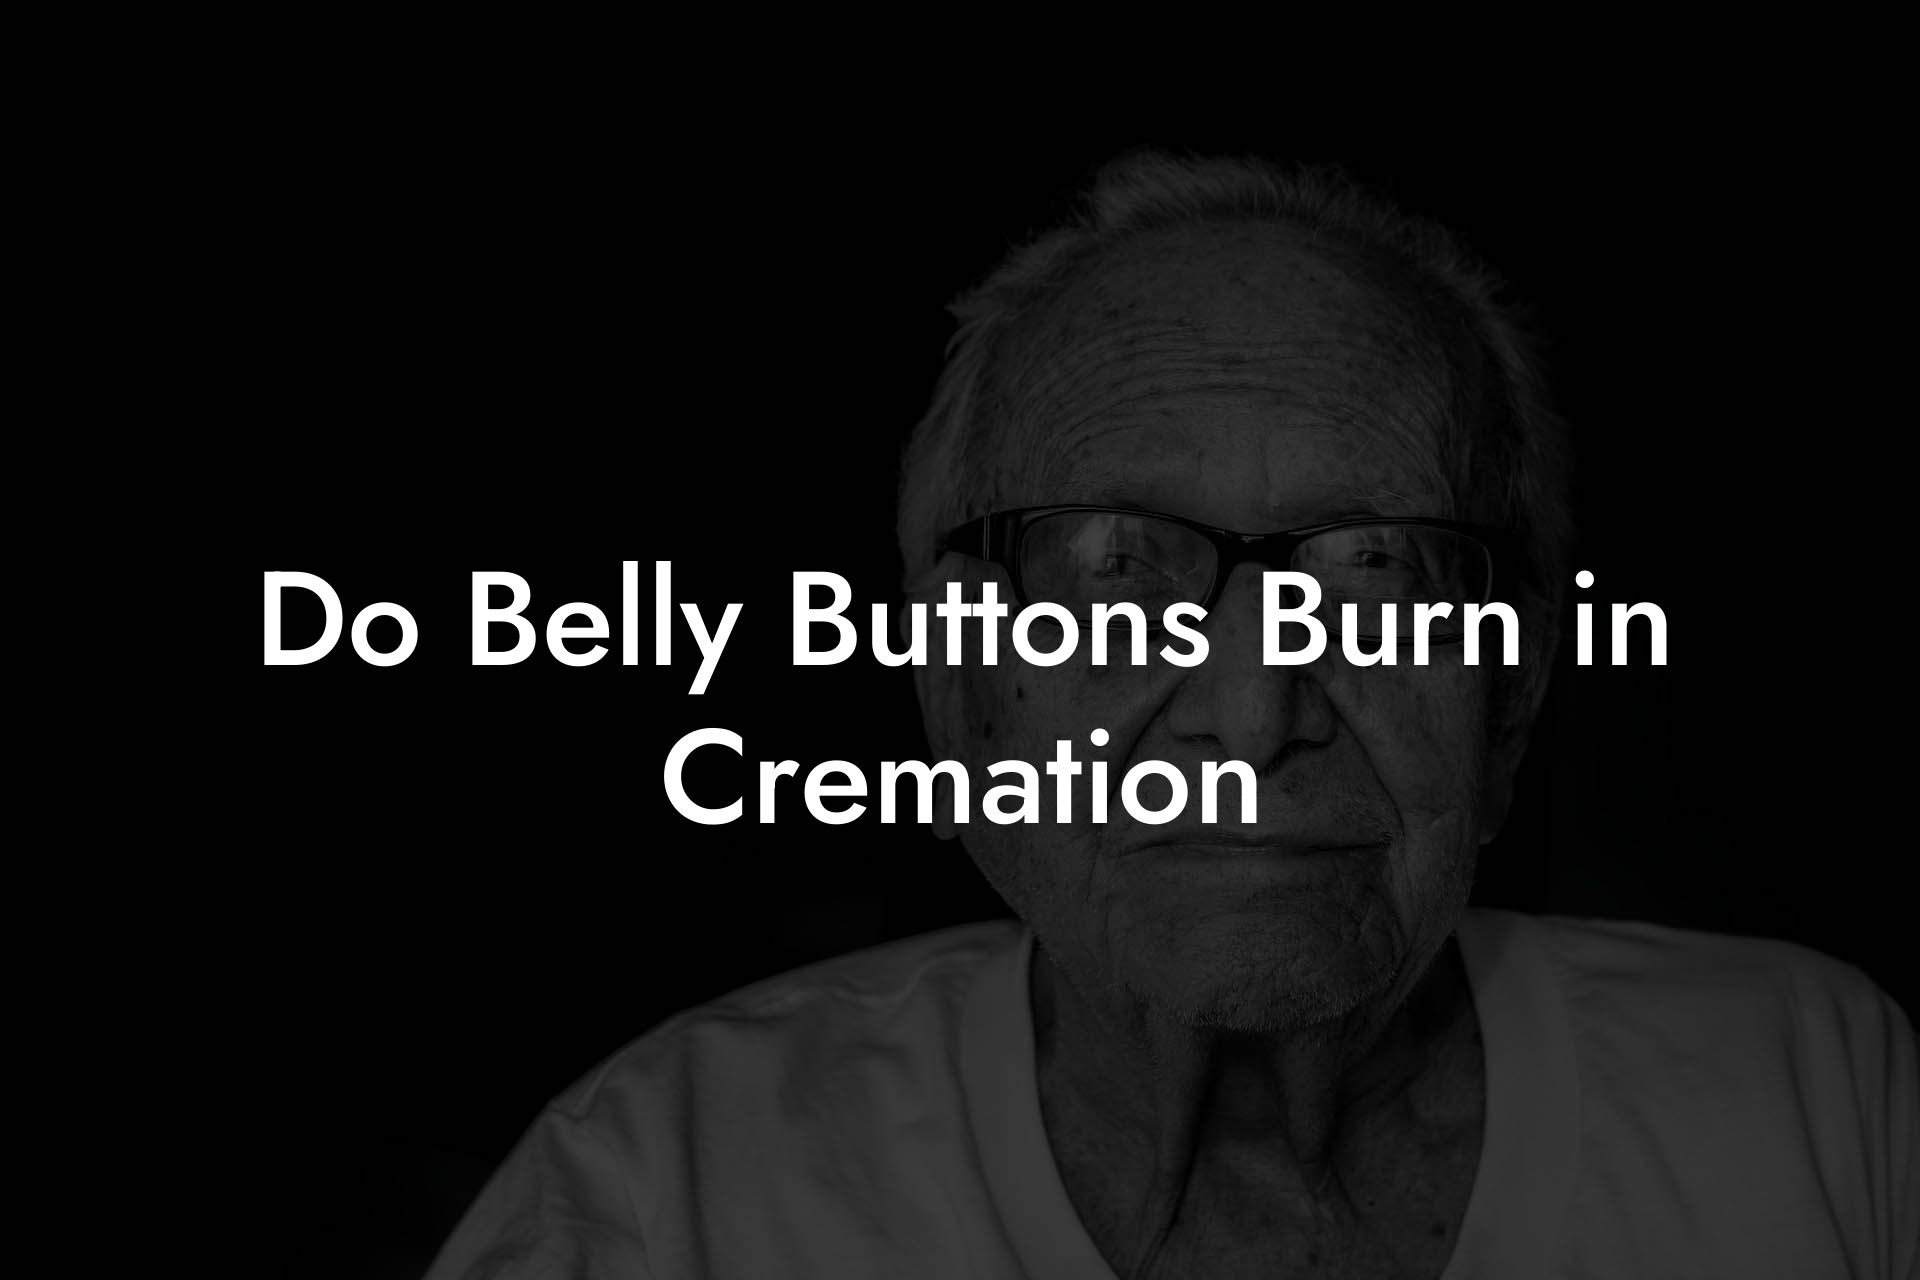 Do Belly Buttons Burn in Cremation